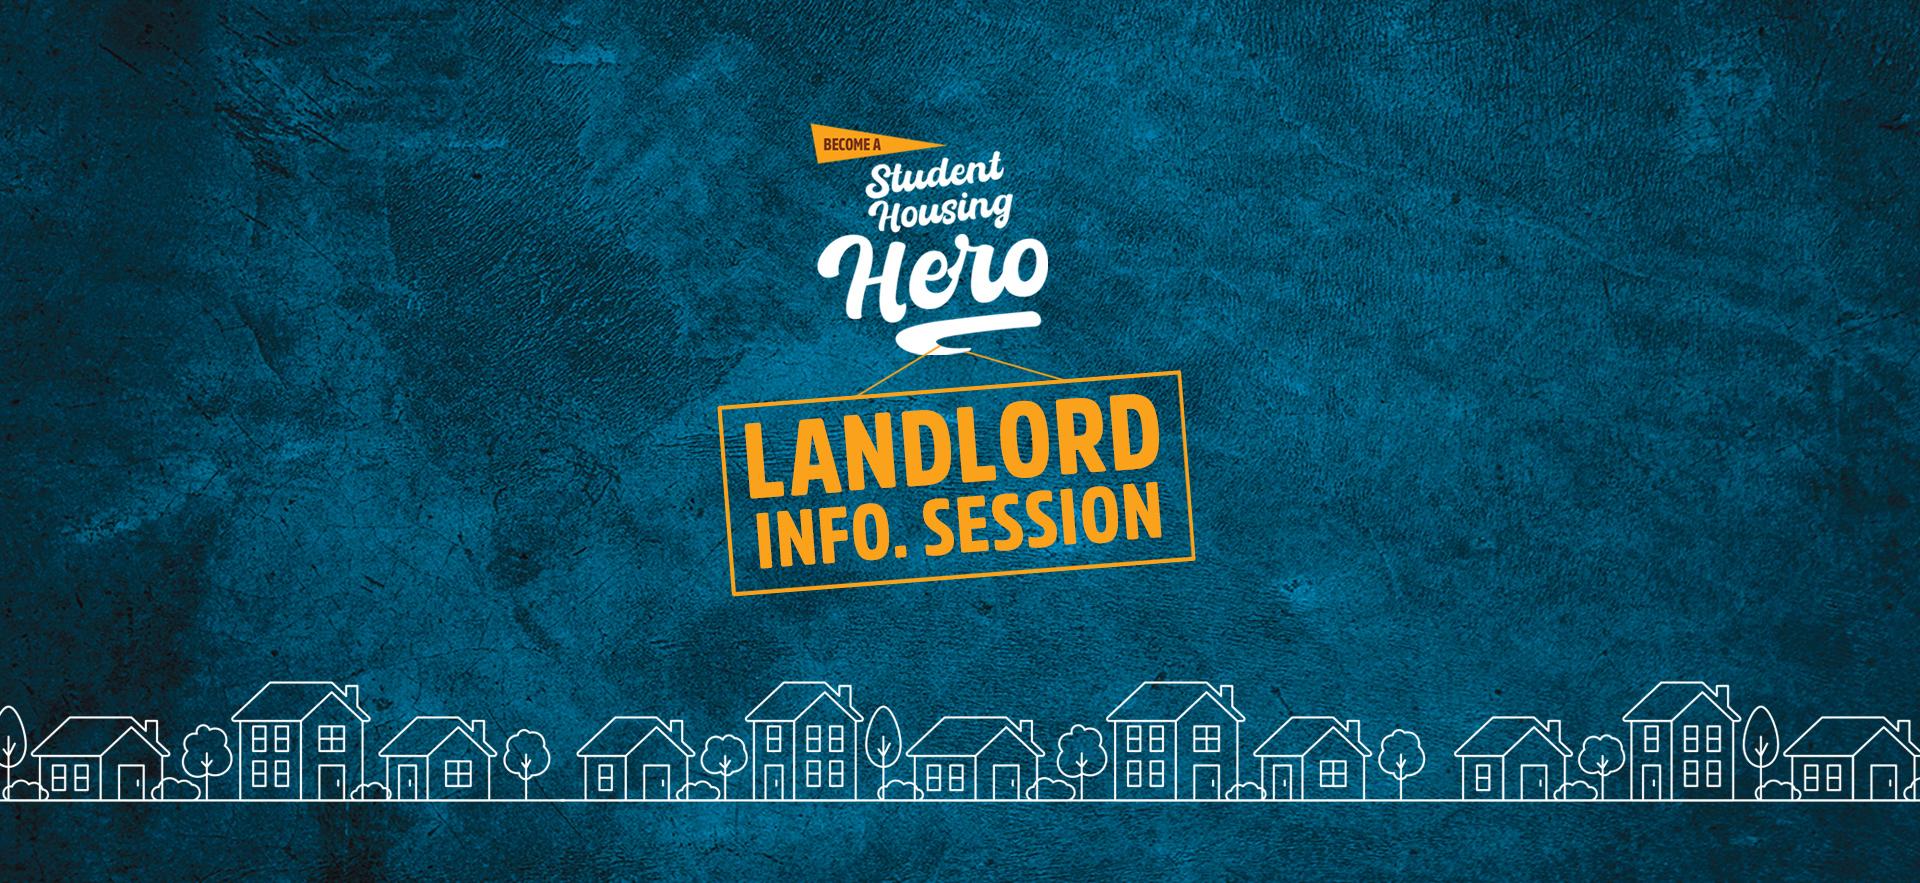 Become a student housing Hero Landlord Info Session